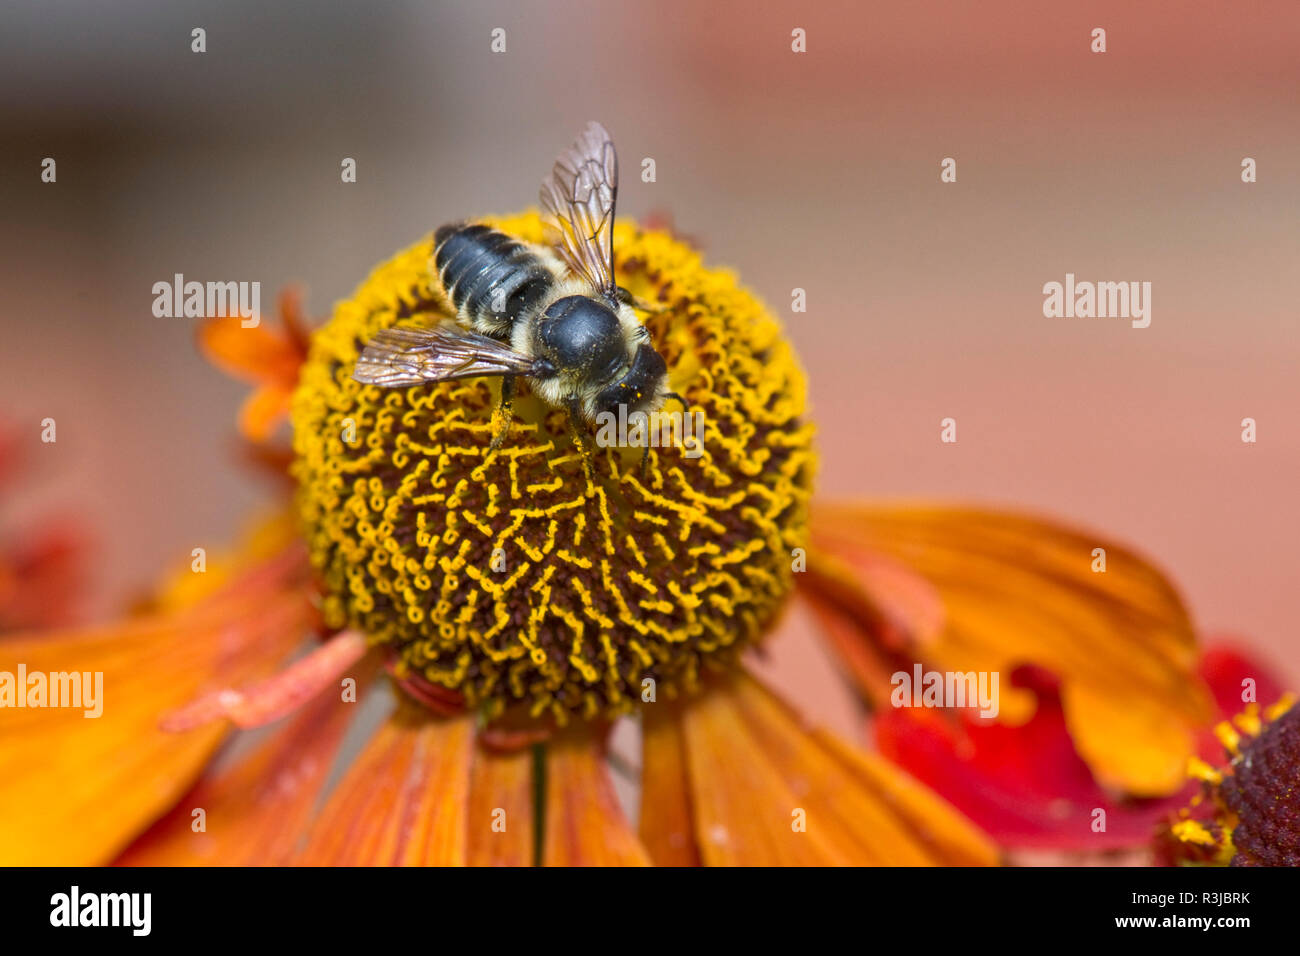 Patchwork leafcutter bee, Megachile centuncularis, with wings outstretched feeding from a Helenium flower Stock Photo